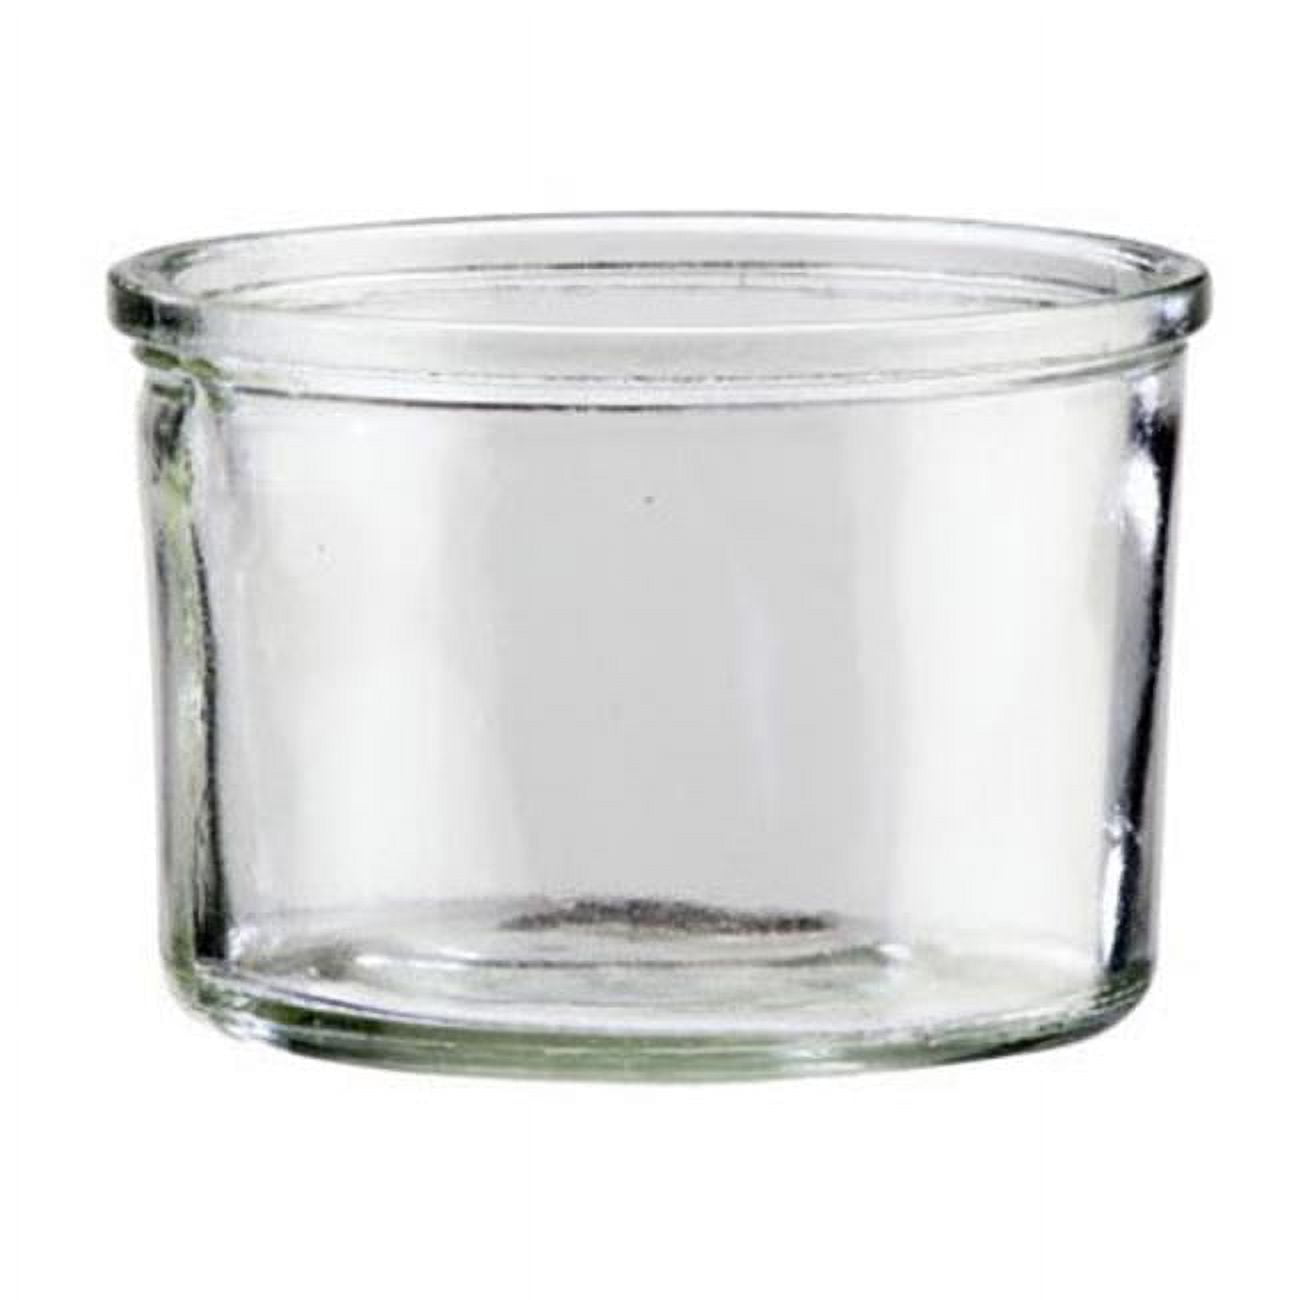 1851-4jar Replacement 16 Oz Small Glass Mixology Jar - 4.25 X 4.25 X 3 In.